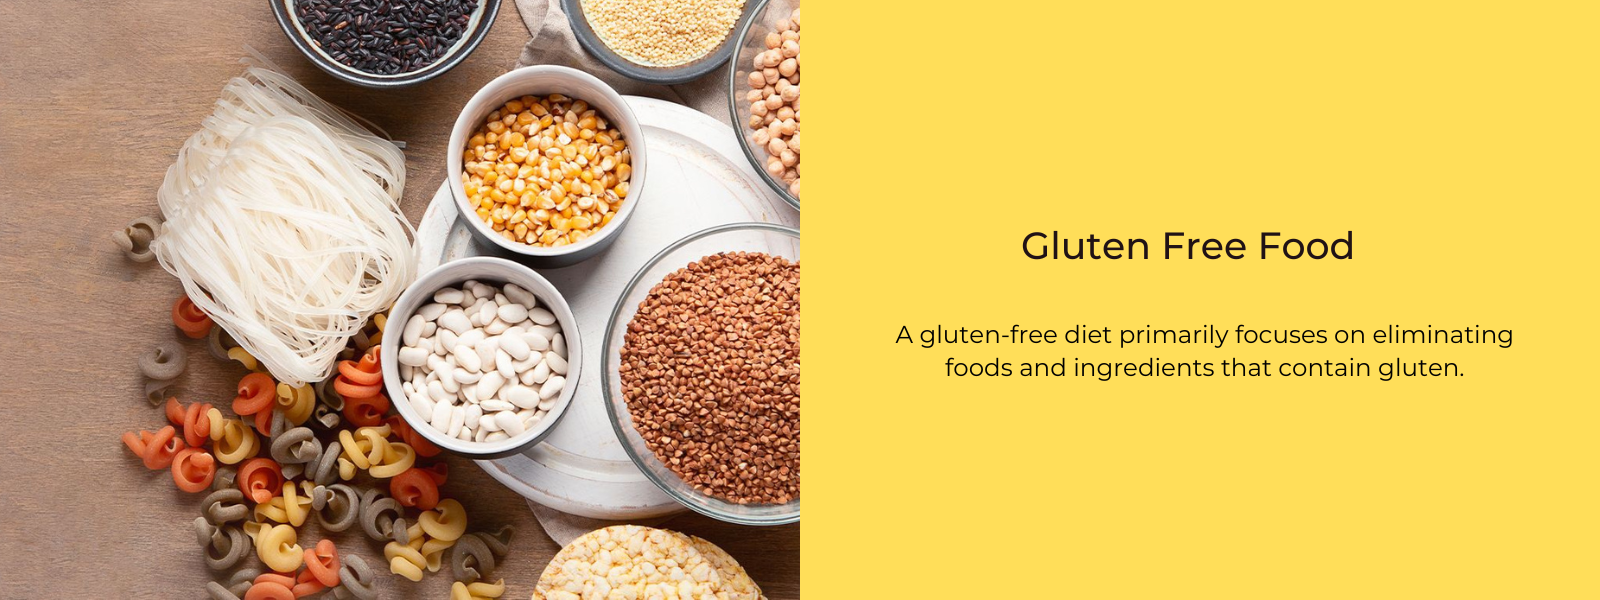 Gluten Free Food – Health Benefits, Uses and Important Facts